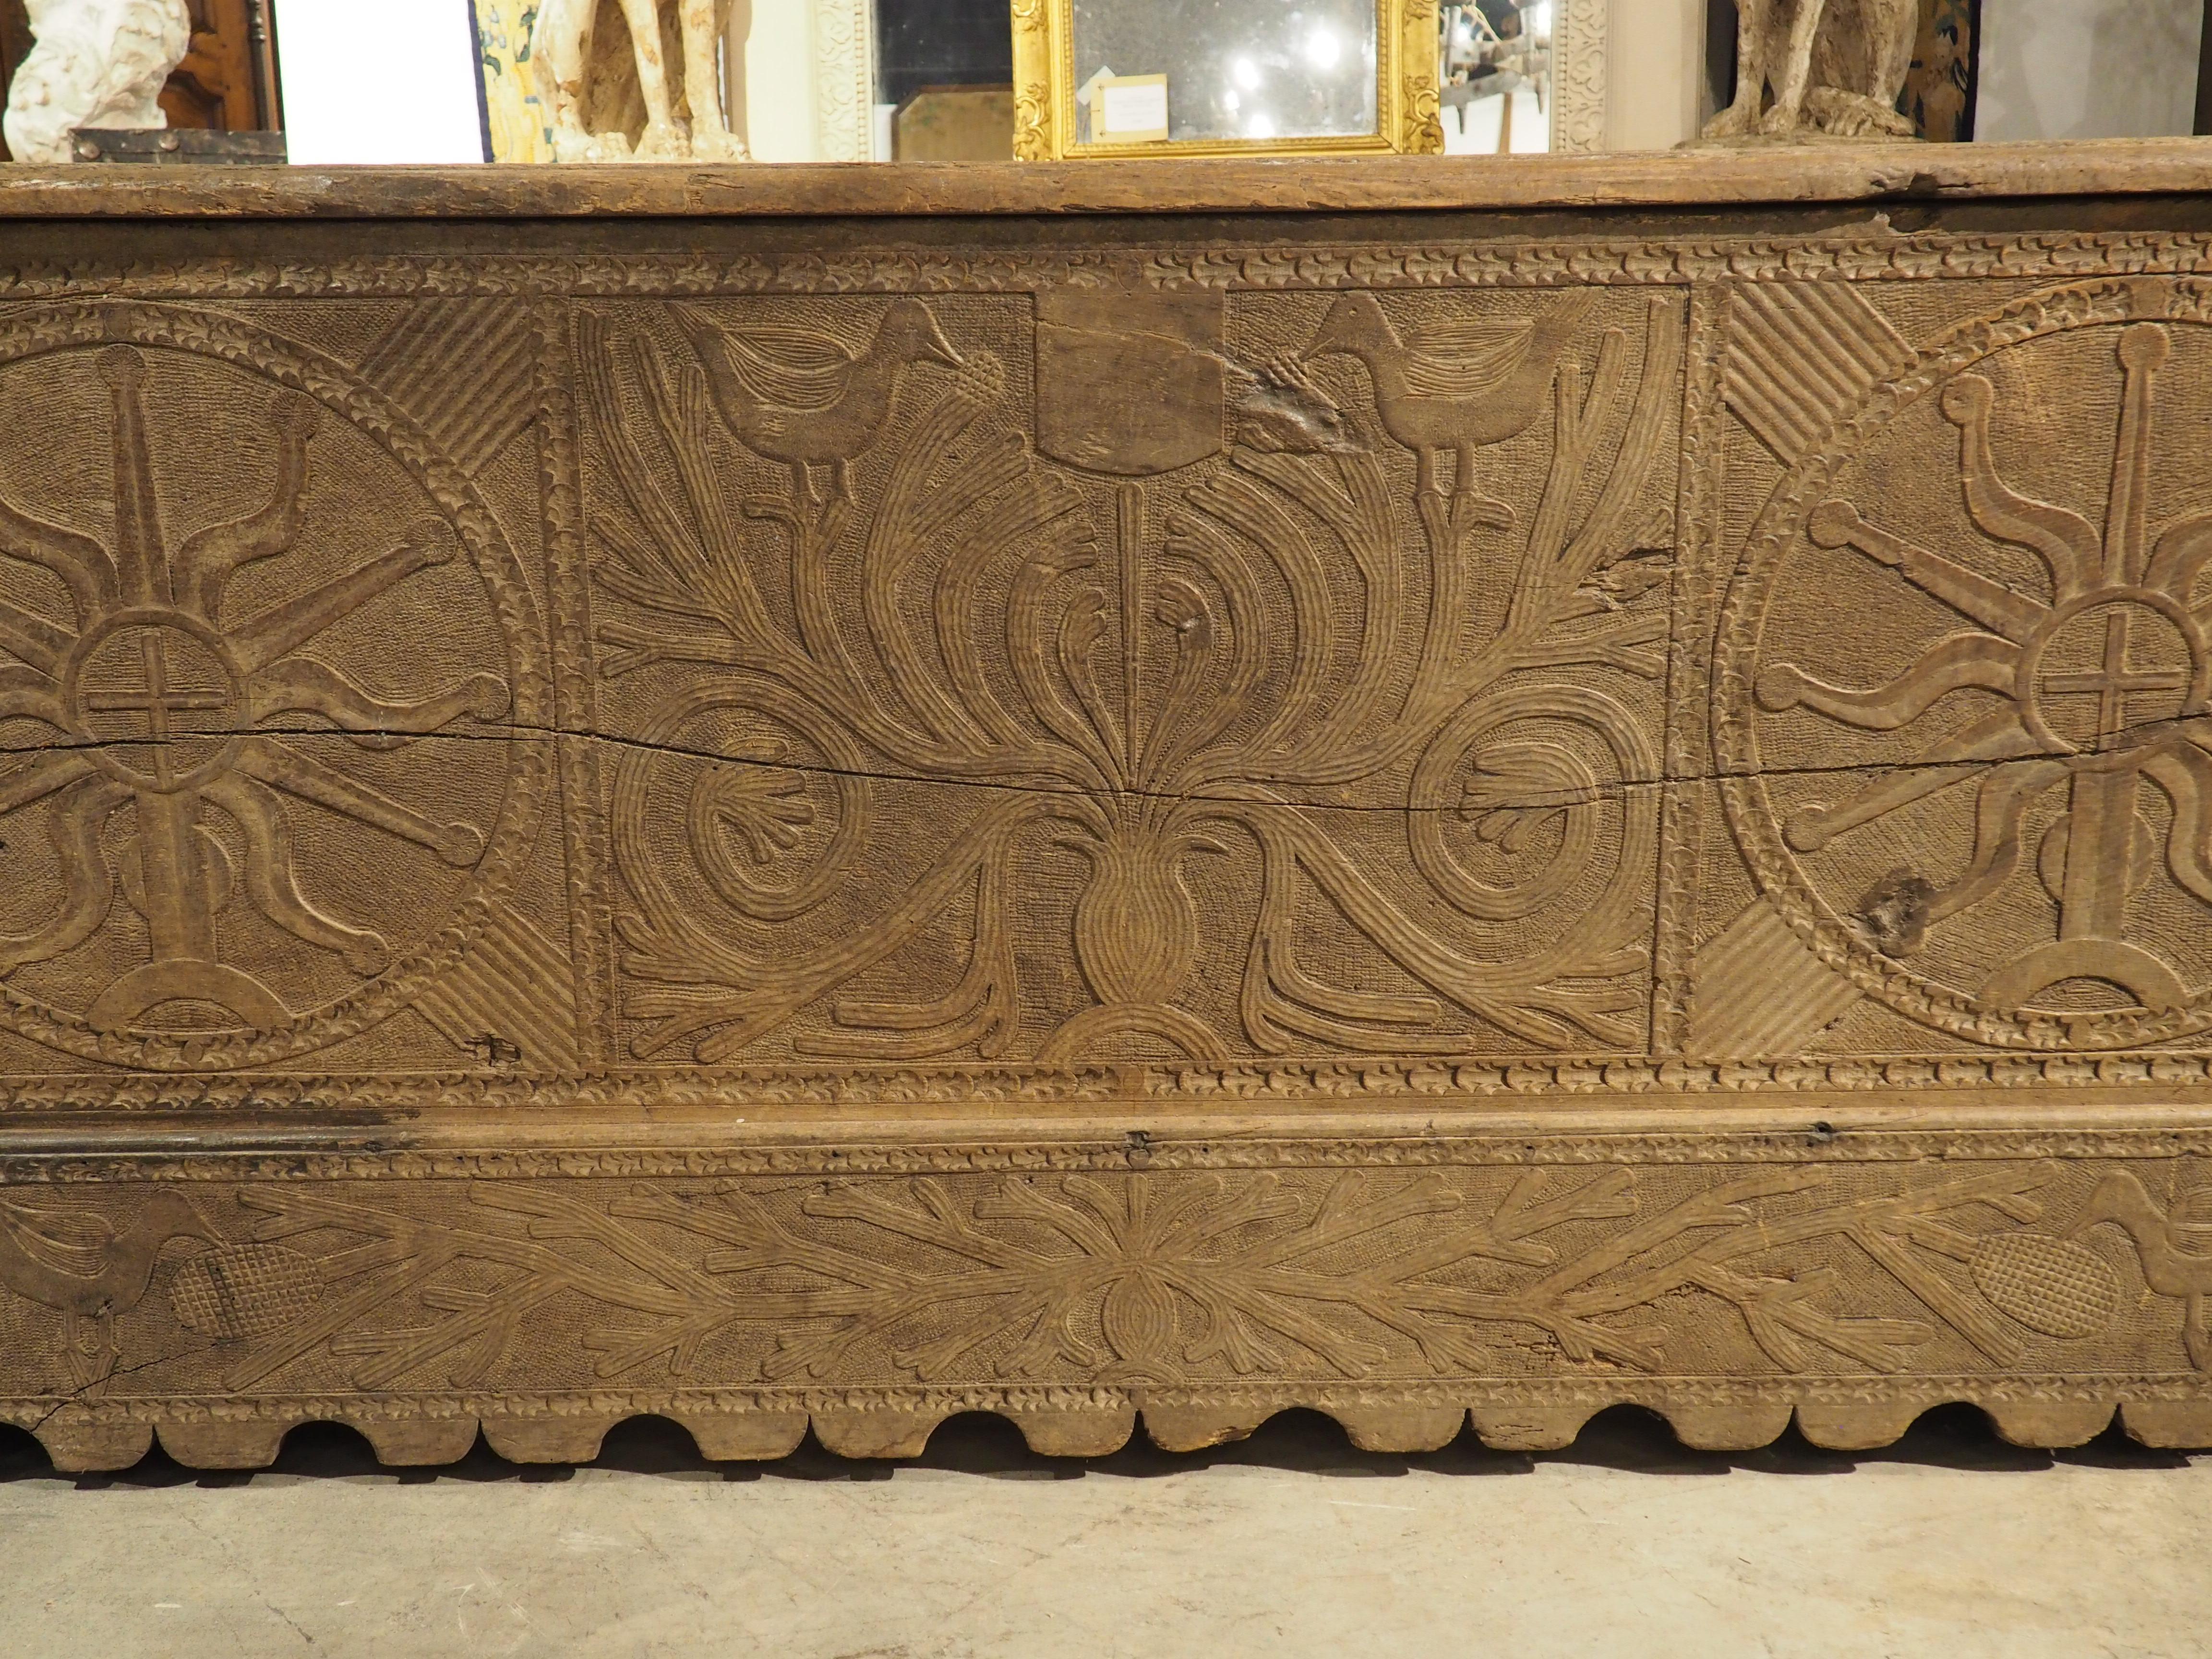 Huge Antique Carved Oak Chest or Trunk from Spain, Late 1500s to Early 1600s 10